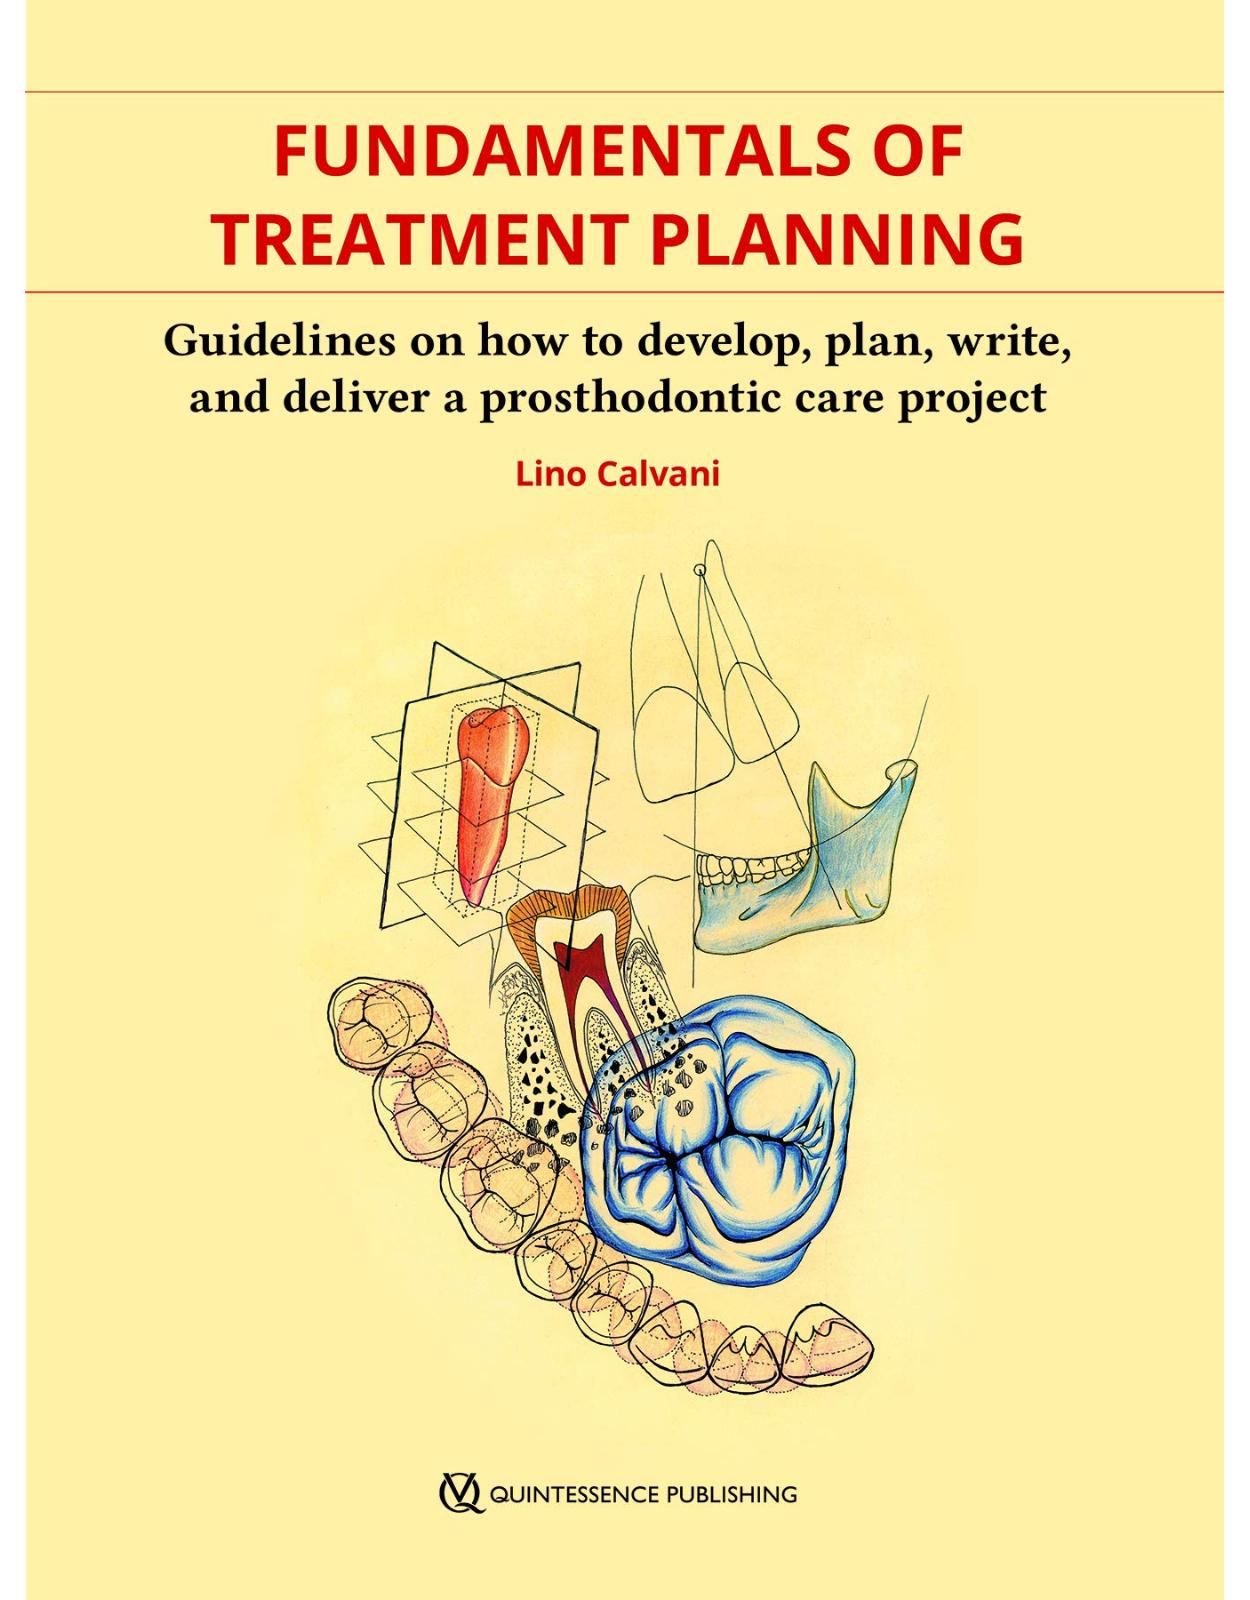 Fundamentals of Treatment Planning: Guidelines on How to Develop, Plan, Write, and Deliver a Prosthodontic Care Project